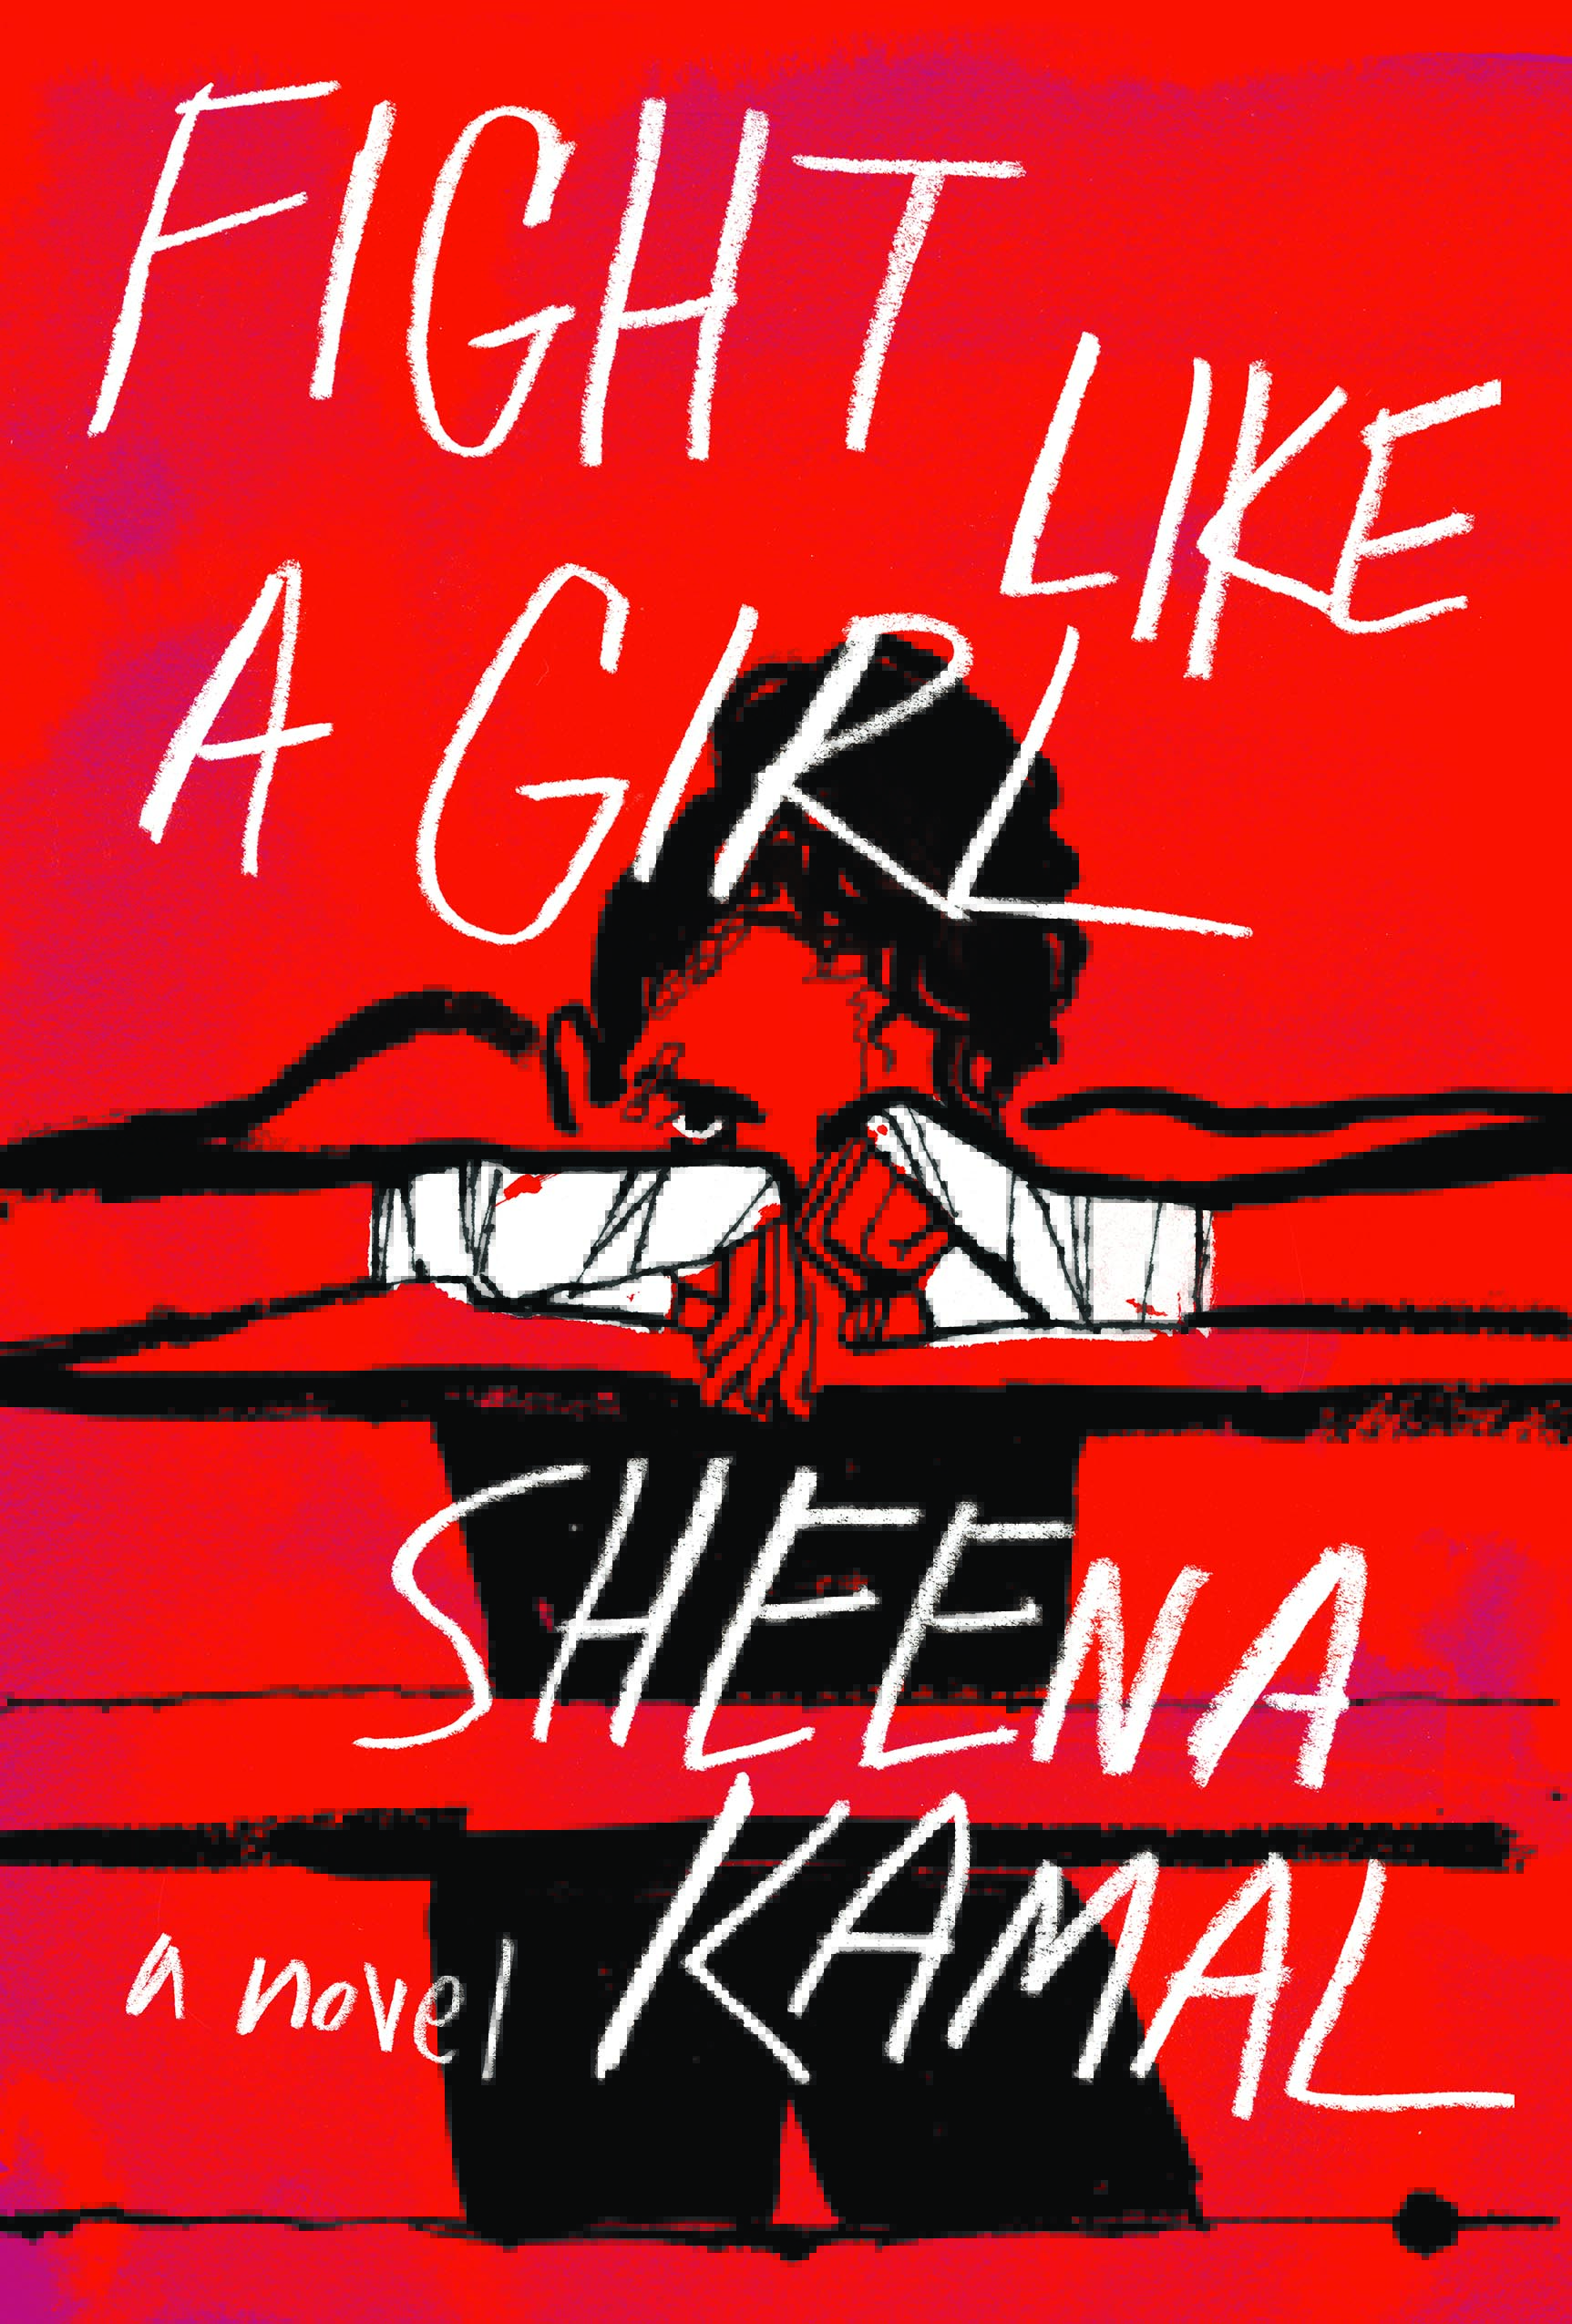 Book Cover for Fight Like A Girl with a boxer on the cover